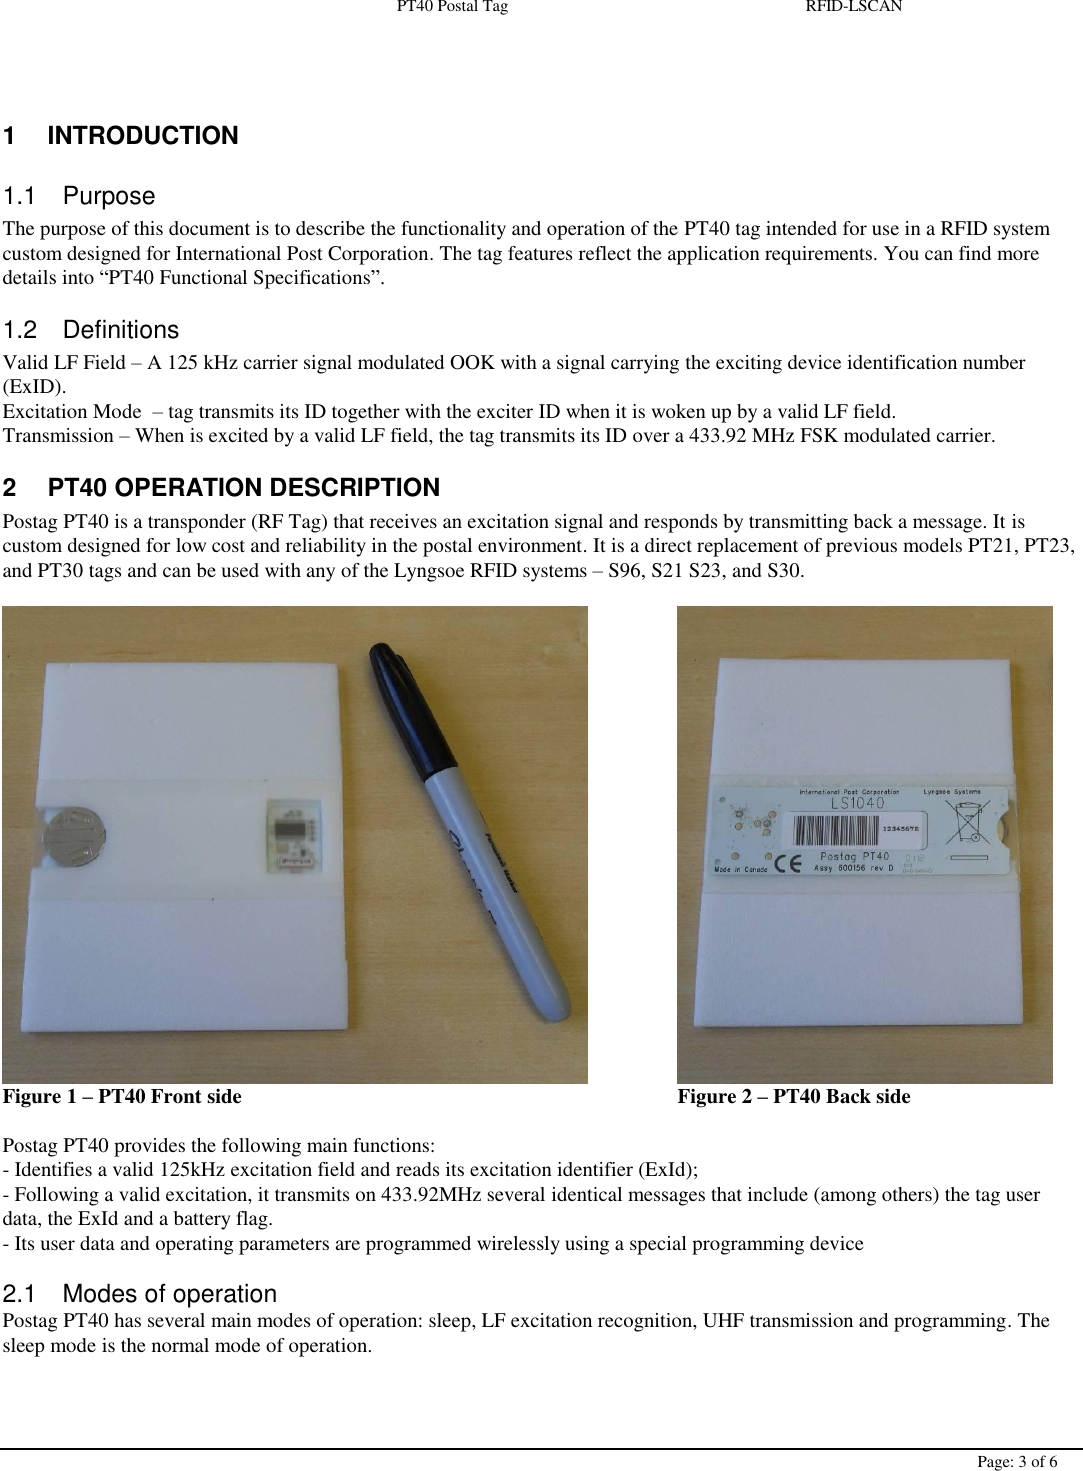  PT40 Postal Tag  RFID-LSCAN        Page: 3 of 6   1  INTRODUCTION 1.1  Purpose The purpose of this document is to describe the functionality and operation of the PT40 tag intended for use in a RFID system custom designed for International Post Corporation. The tag features reflect the application requirements. You can find more details into “PT40 Functional Specifications”. 1.2  Definitions Valid LF Field – A 125 kHz carrier signal modulated OOK with a signal carrying the exciting device identification number (ExID). Excitation Mode  – tag transmits its ID together with the exciter ID when it is woken up by a valid LF field. Transmission – When is excited by a valid LF field, the tag transmits its ID over a 433.92 MHz FSK modulated carrier. 2  PT40 OPERATION DESCRIPTION Postag PT40 is a transponder (RF Tag) that receives an excitation signal and responds by transmitting back a message. It is custom designed for low cost and reliability in the postal environment. It is a direct replacement of previous models PT21, PT23, and PT30 tags and can be used with any of the Lyngsoe RFID systems – S96, S21 S23, and S30.         Figure 1 – PT40 Front side            Figure 2 – PT40 Back side    Postag PT40 provides the following main functions: - Identifies a valid 125kHz excitation field and reads its excitation identifier (ExId); - Following a valid excitation, it transmits on 433.92MHz several identical messages that include (among others) the tag user data, the ExId and a battery flag. - Its user data and operating parameters are programmed wirelessly using a special programming device  2.1  Modes of operation Postag PT40 has several main modes of operation: sleep, LF excitation recognition, UHF transmission and programming. The sleep mode is the normal mode of operation.  